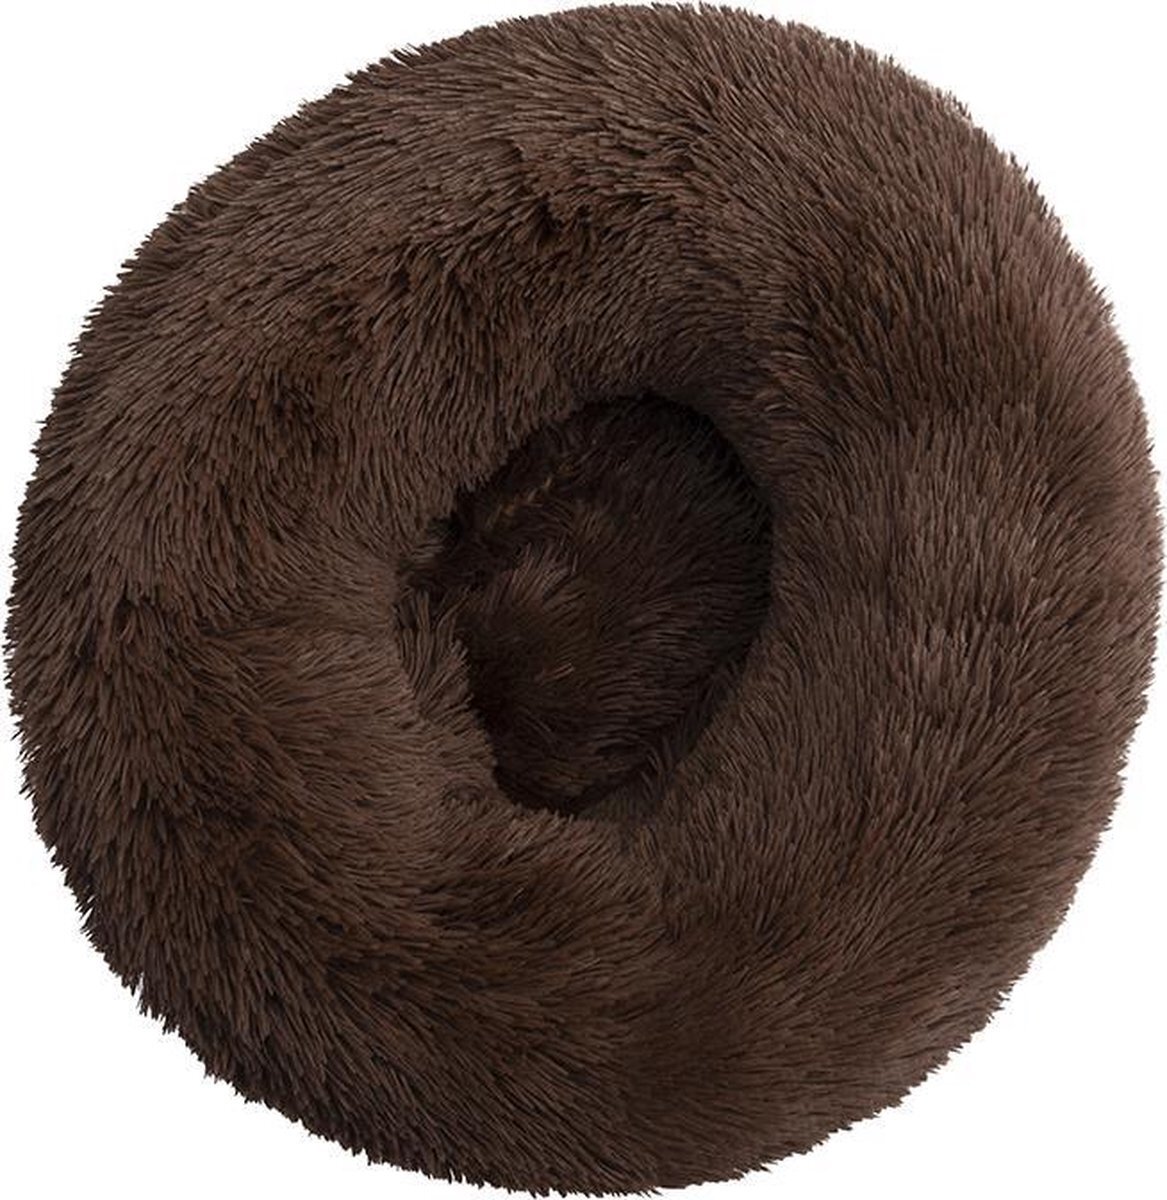 BEESSIES BEESSIES® donut hondenmand/kattenmand 50 cm - wasbare hoes - donkerbruin - huisdierbed hond kat mand donkerbruin